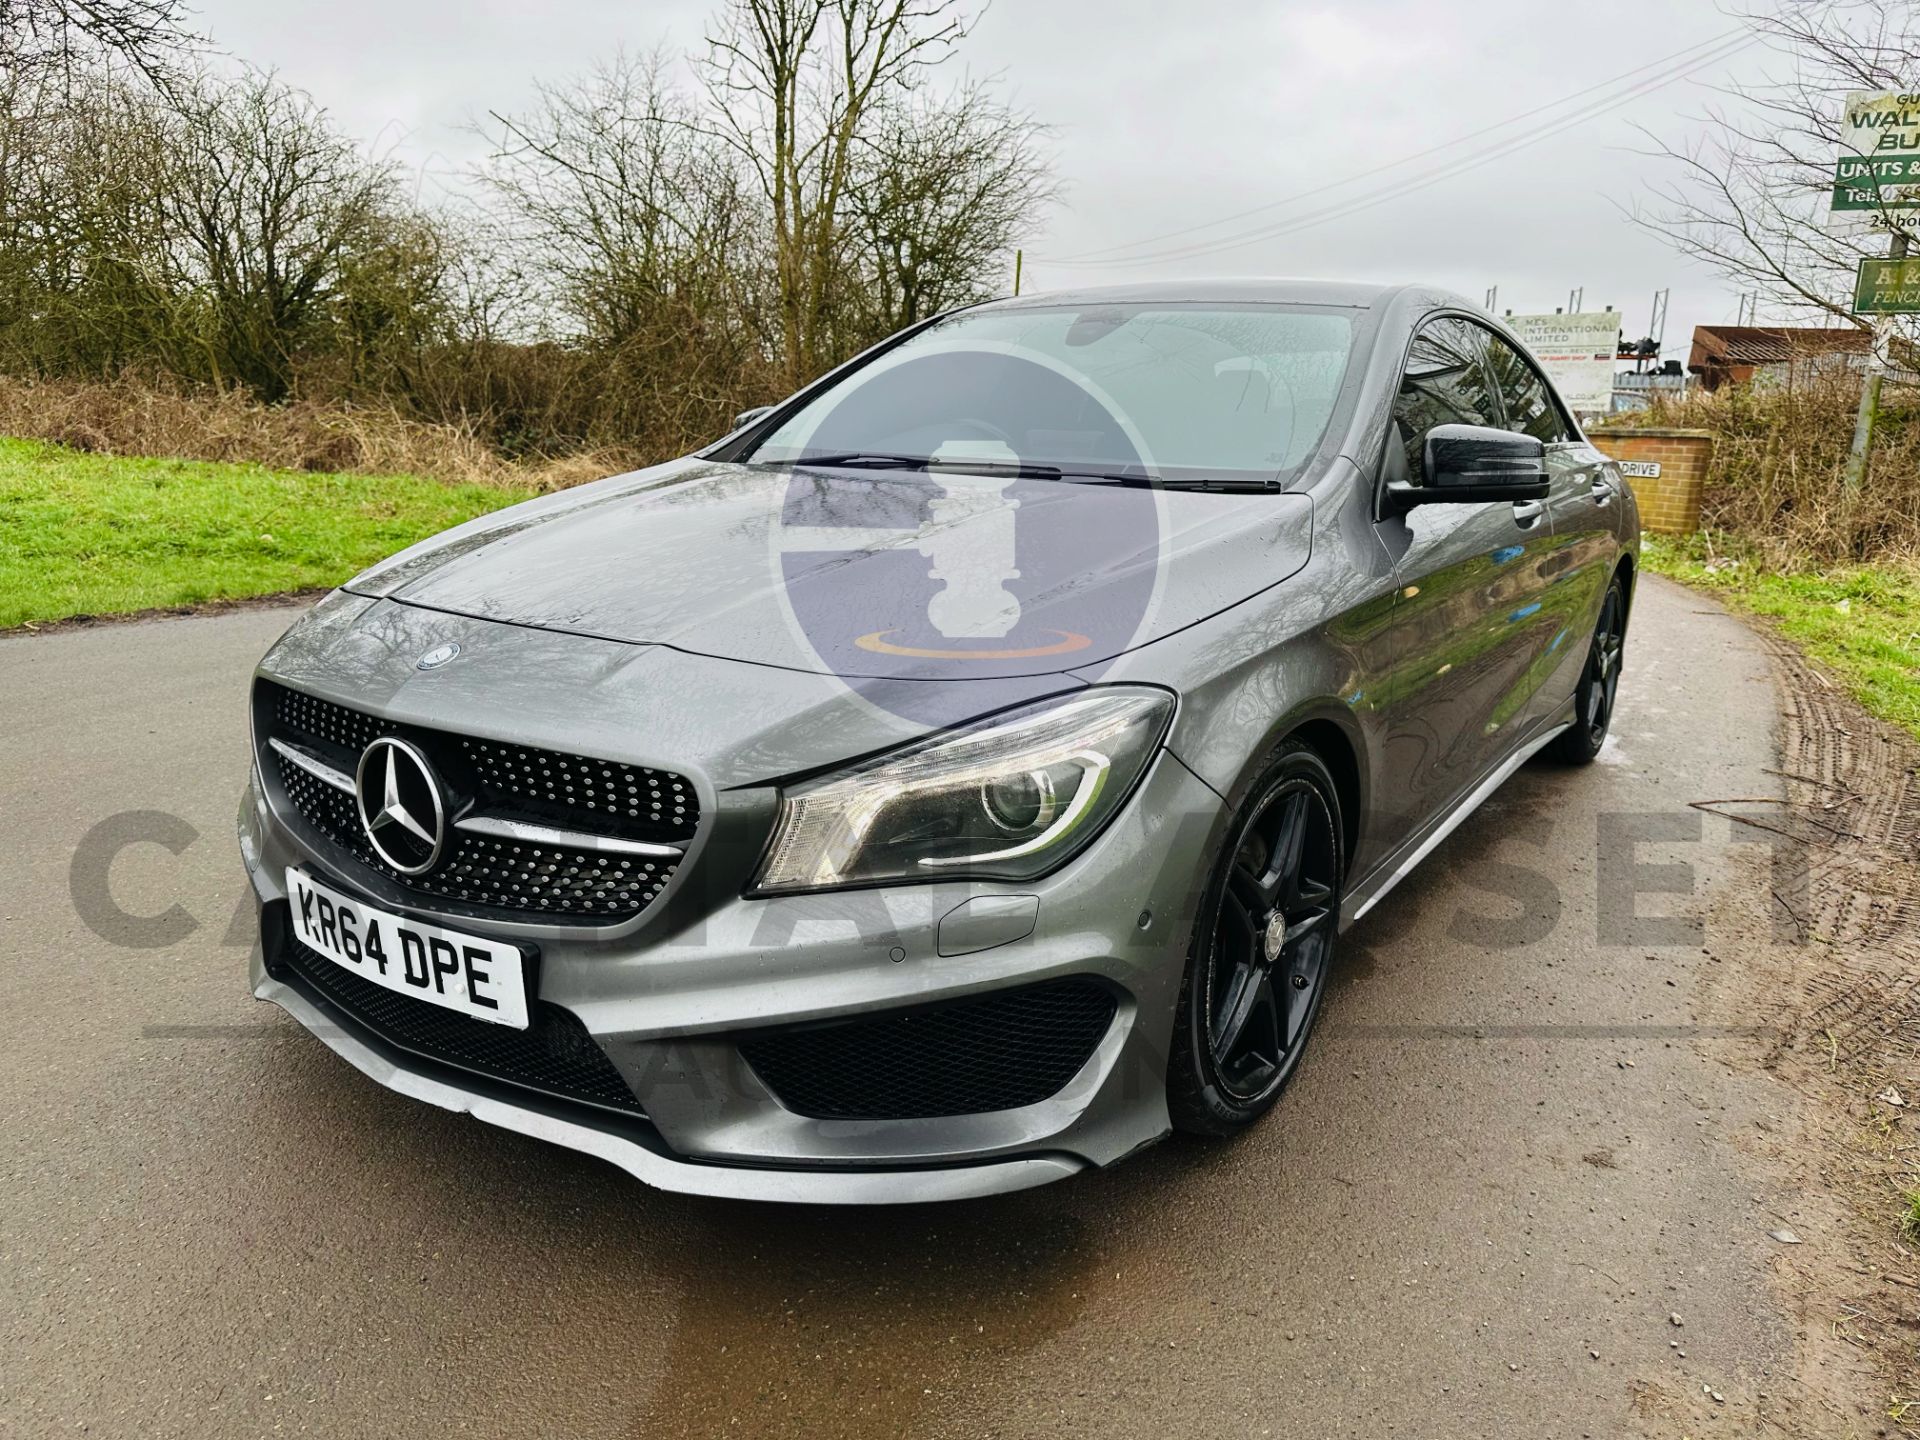 (ON SALE) MERCEDES-BENZ CLA 220 CDI *AMG SPORT* (7G - DCT AUTOMATIC) - 2015 MODEL - SERVICE HISTORY - Image 4 of 33